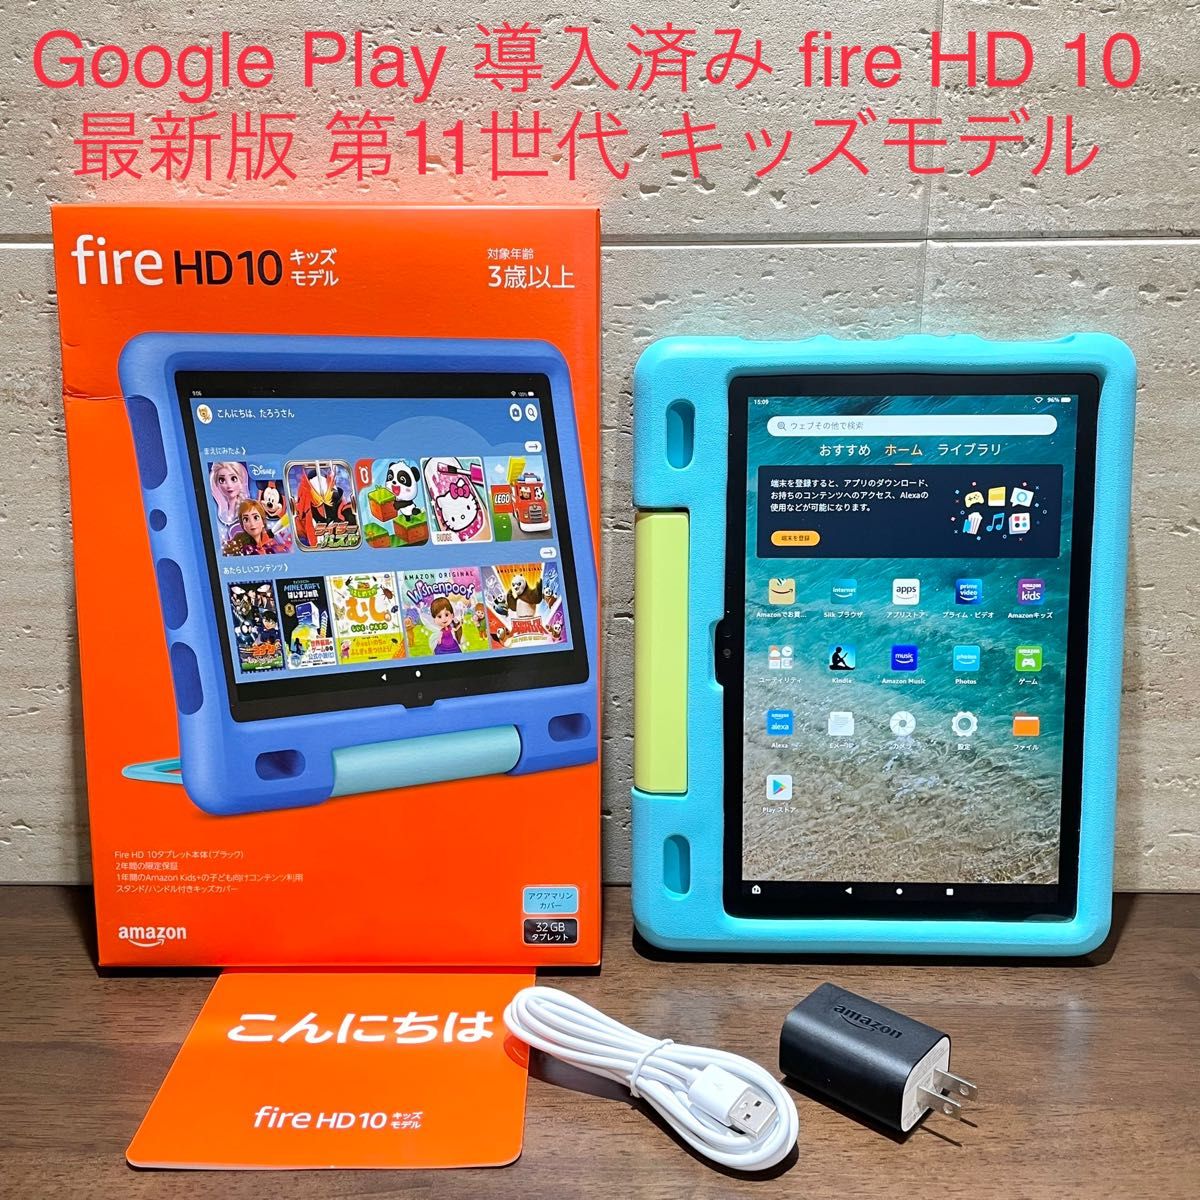 Amazon fire HD 10 キッズモデル 最新版 第11世代 アクアマリン 液晶保護フィルム貼り付け済み 中古美品